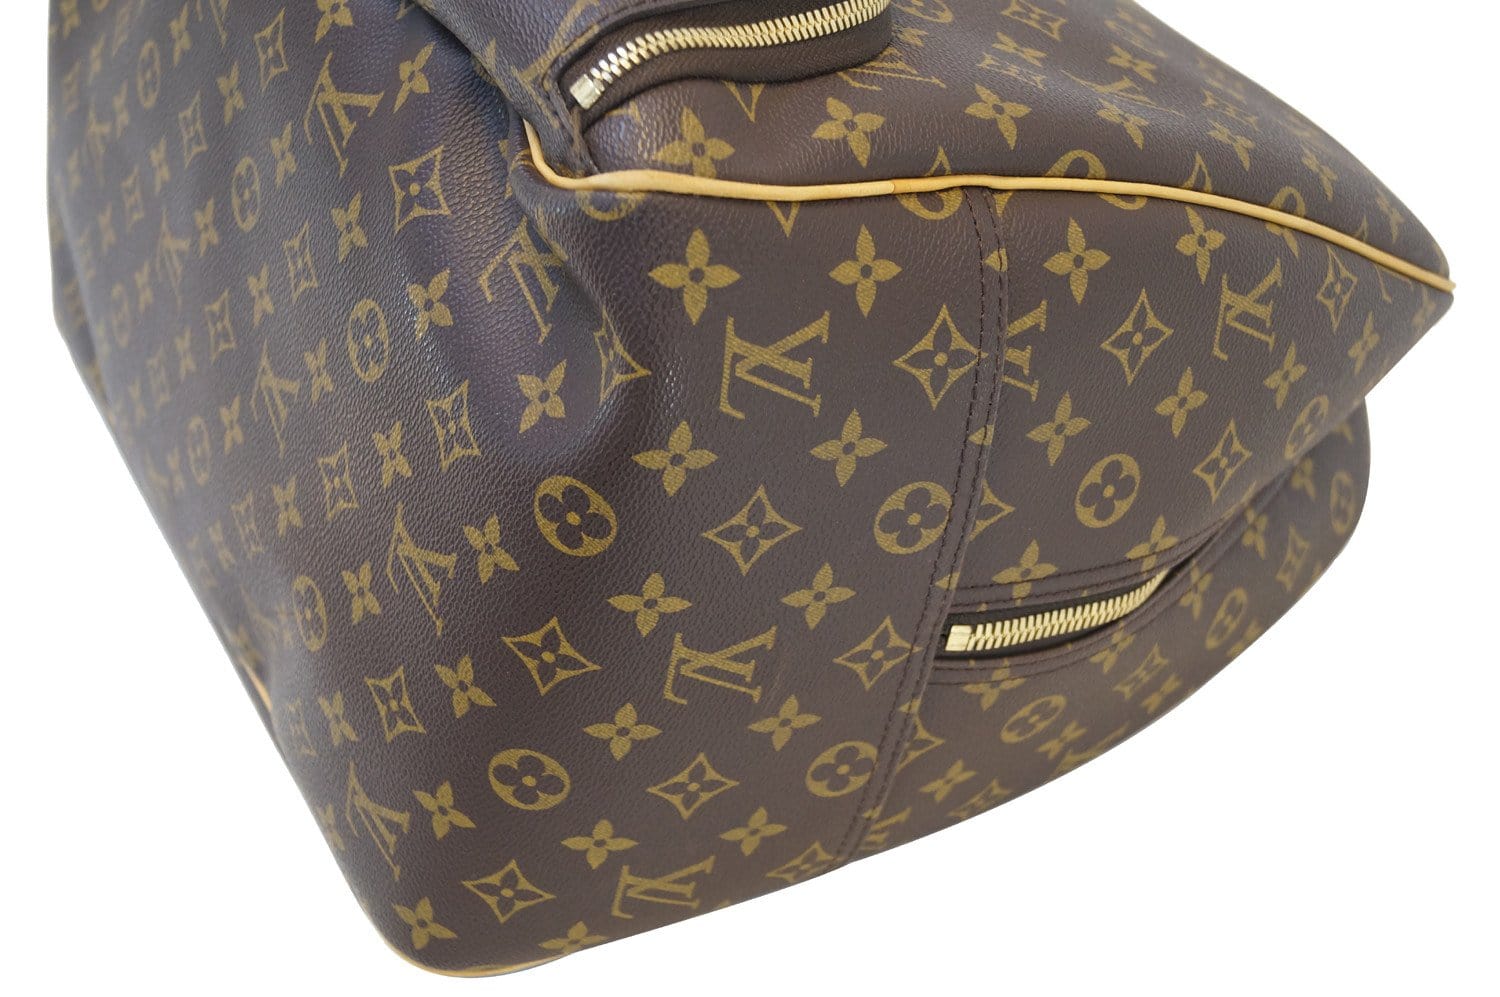 Louis Vuitton Trunk Bag Leather Bags & Handbags for Women, Authenticity  Guaranteed